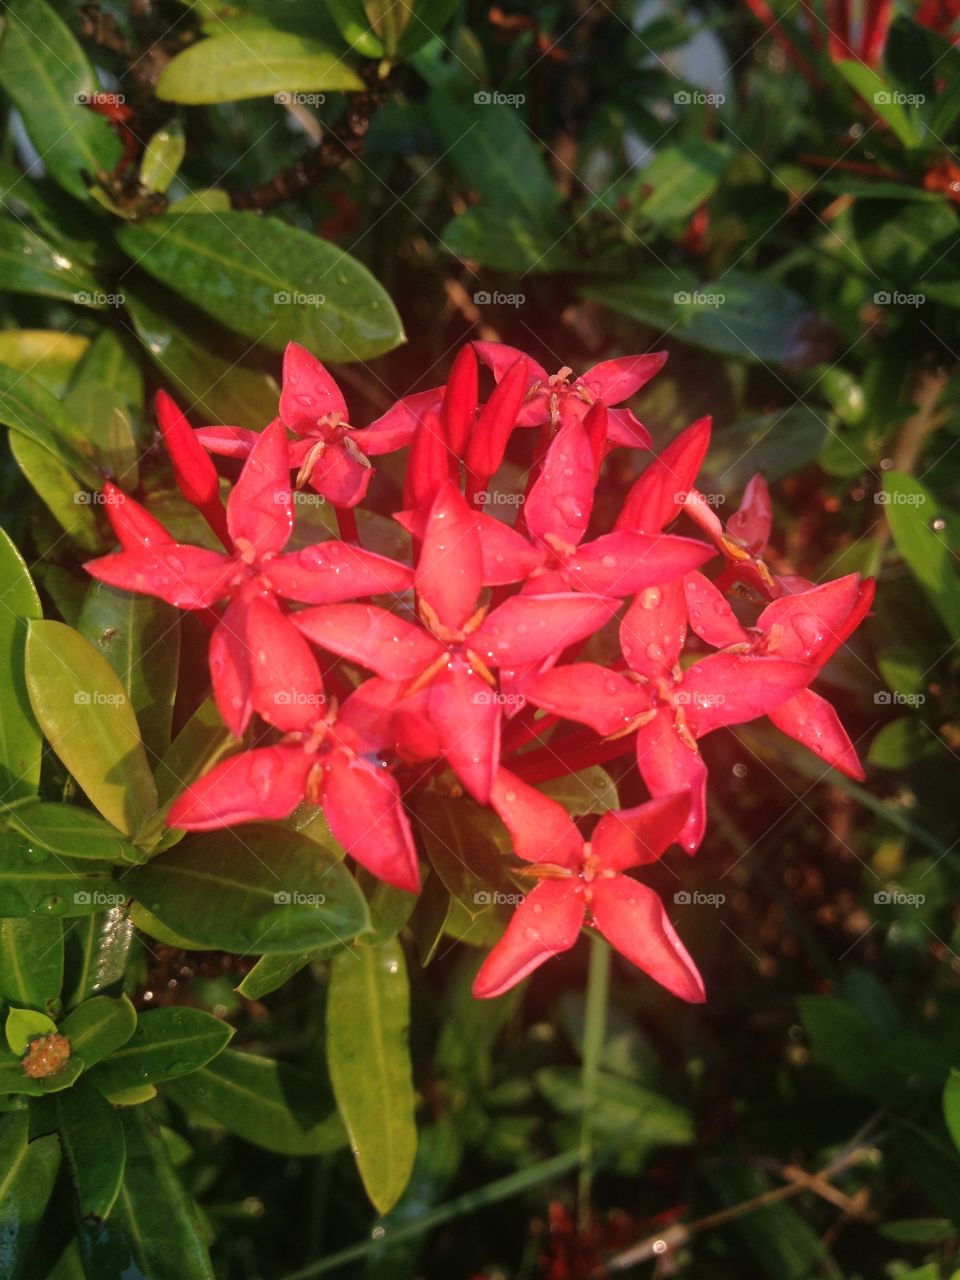 Ixora Beautiful flower and grass field for background design. You can put some words to tell somone.